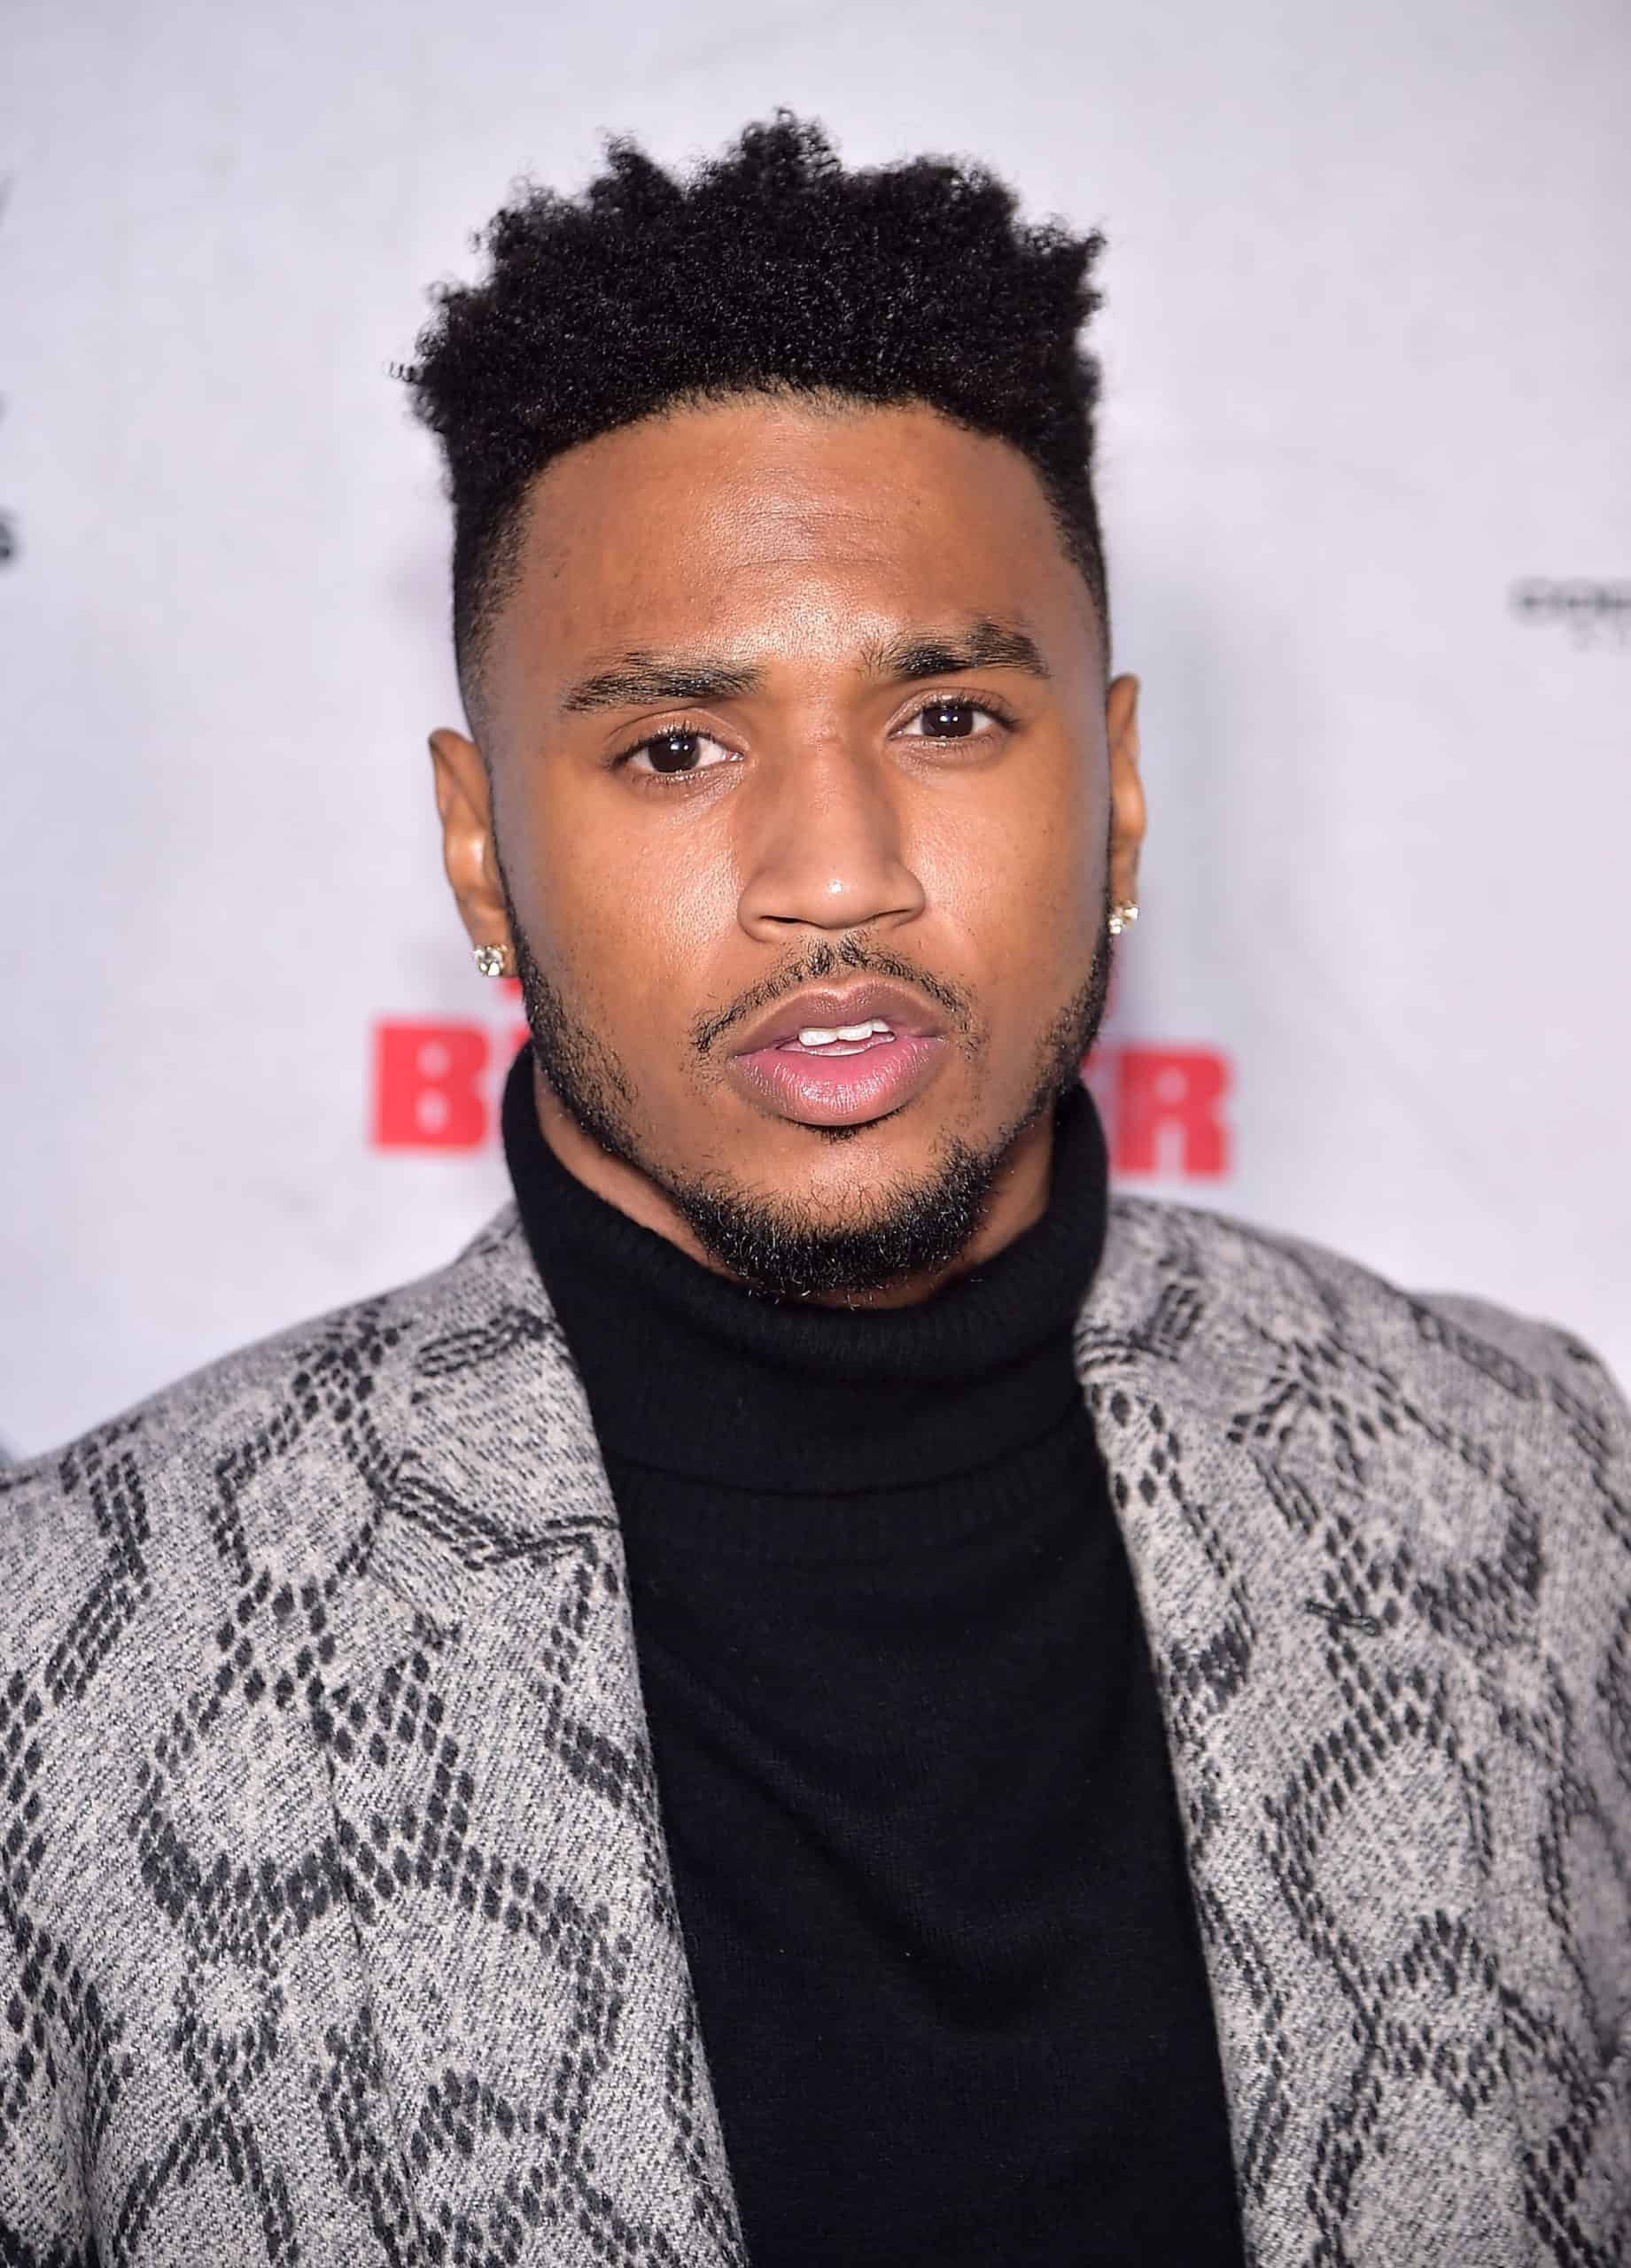 Trey Songz arrested after physical altercation with police officer